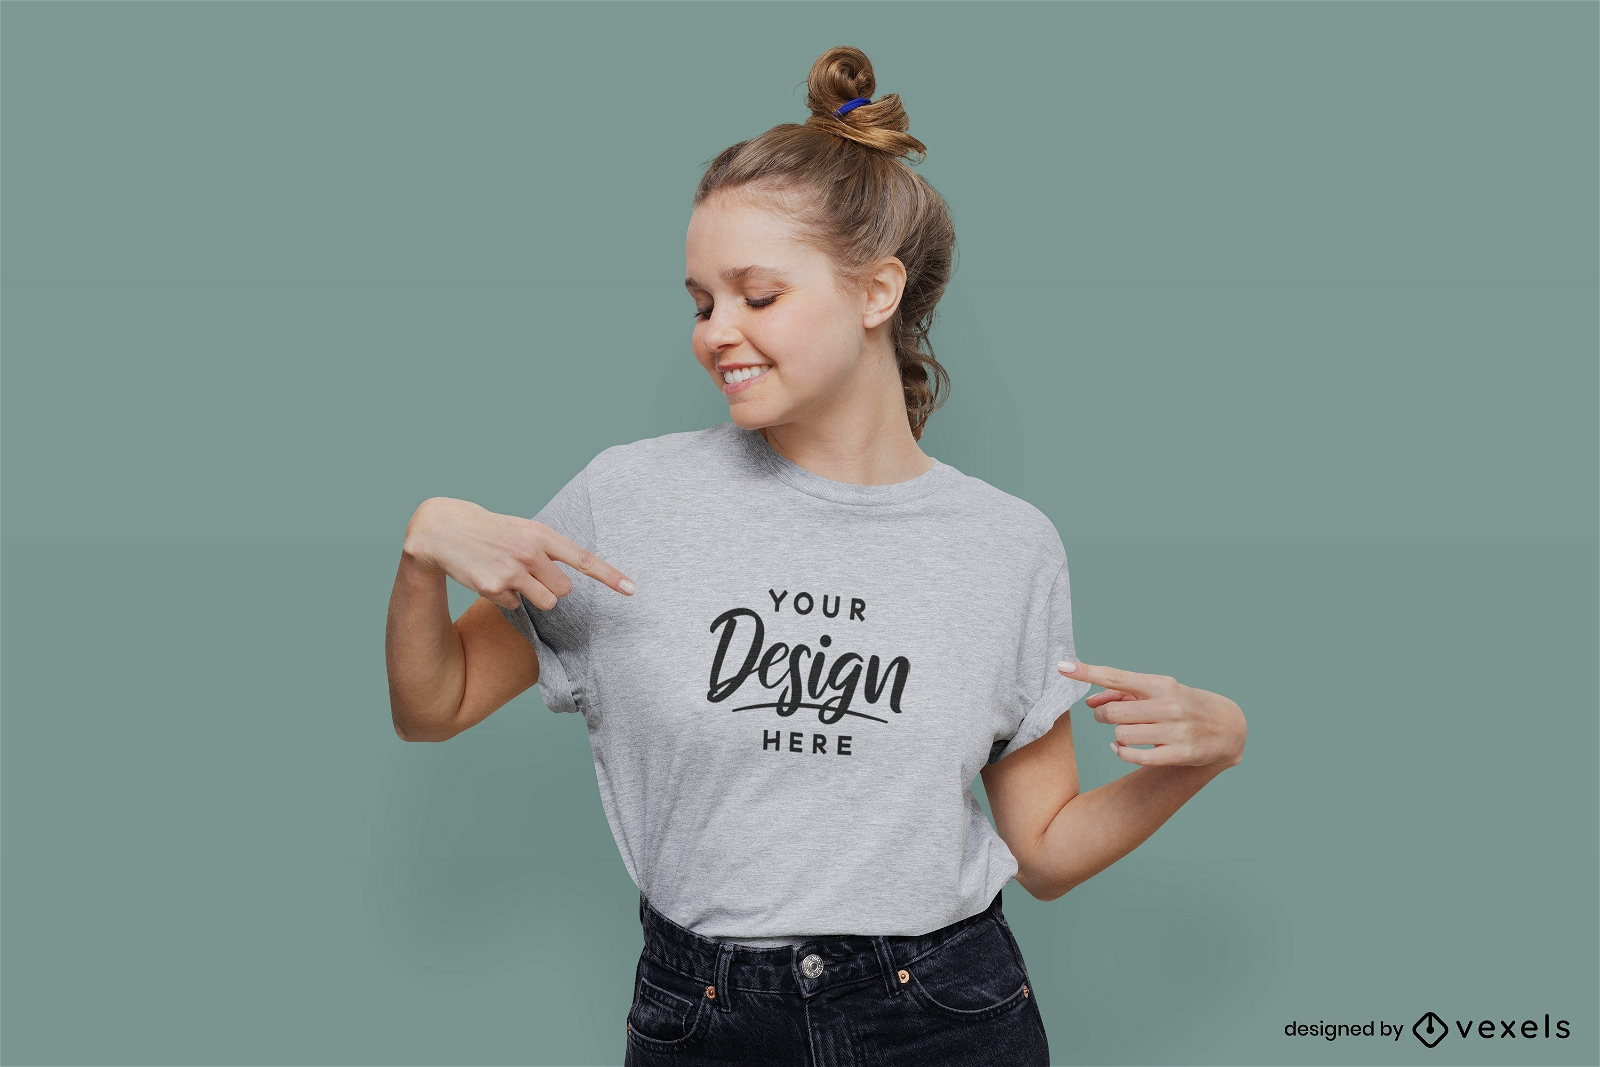 Girl in grey t-shirt with flat background mockup